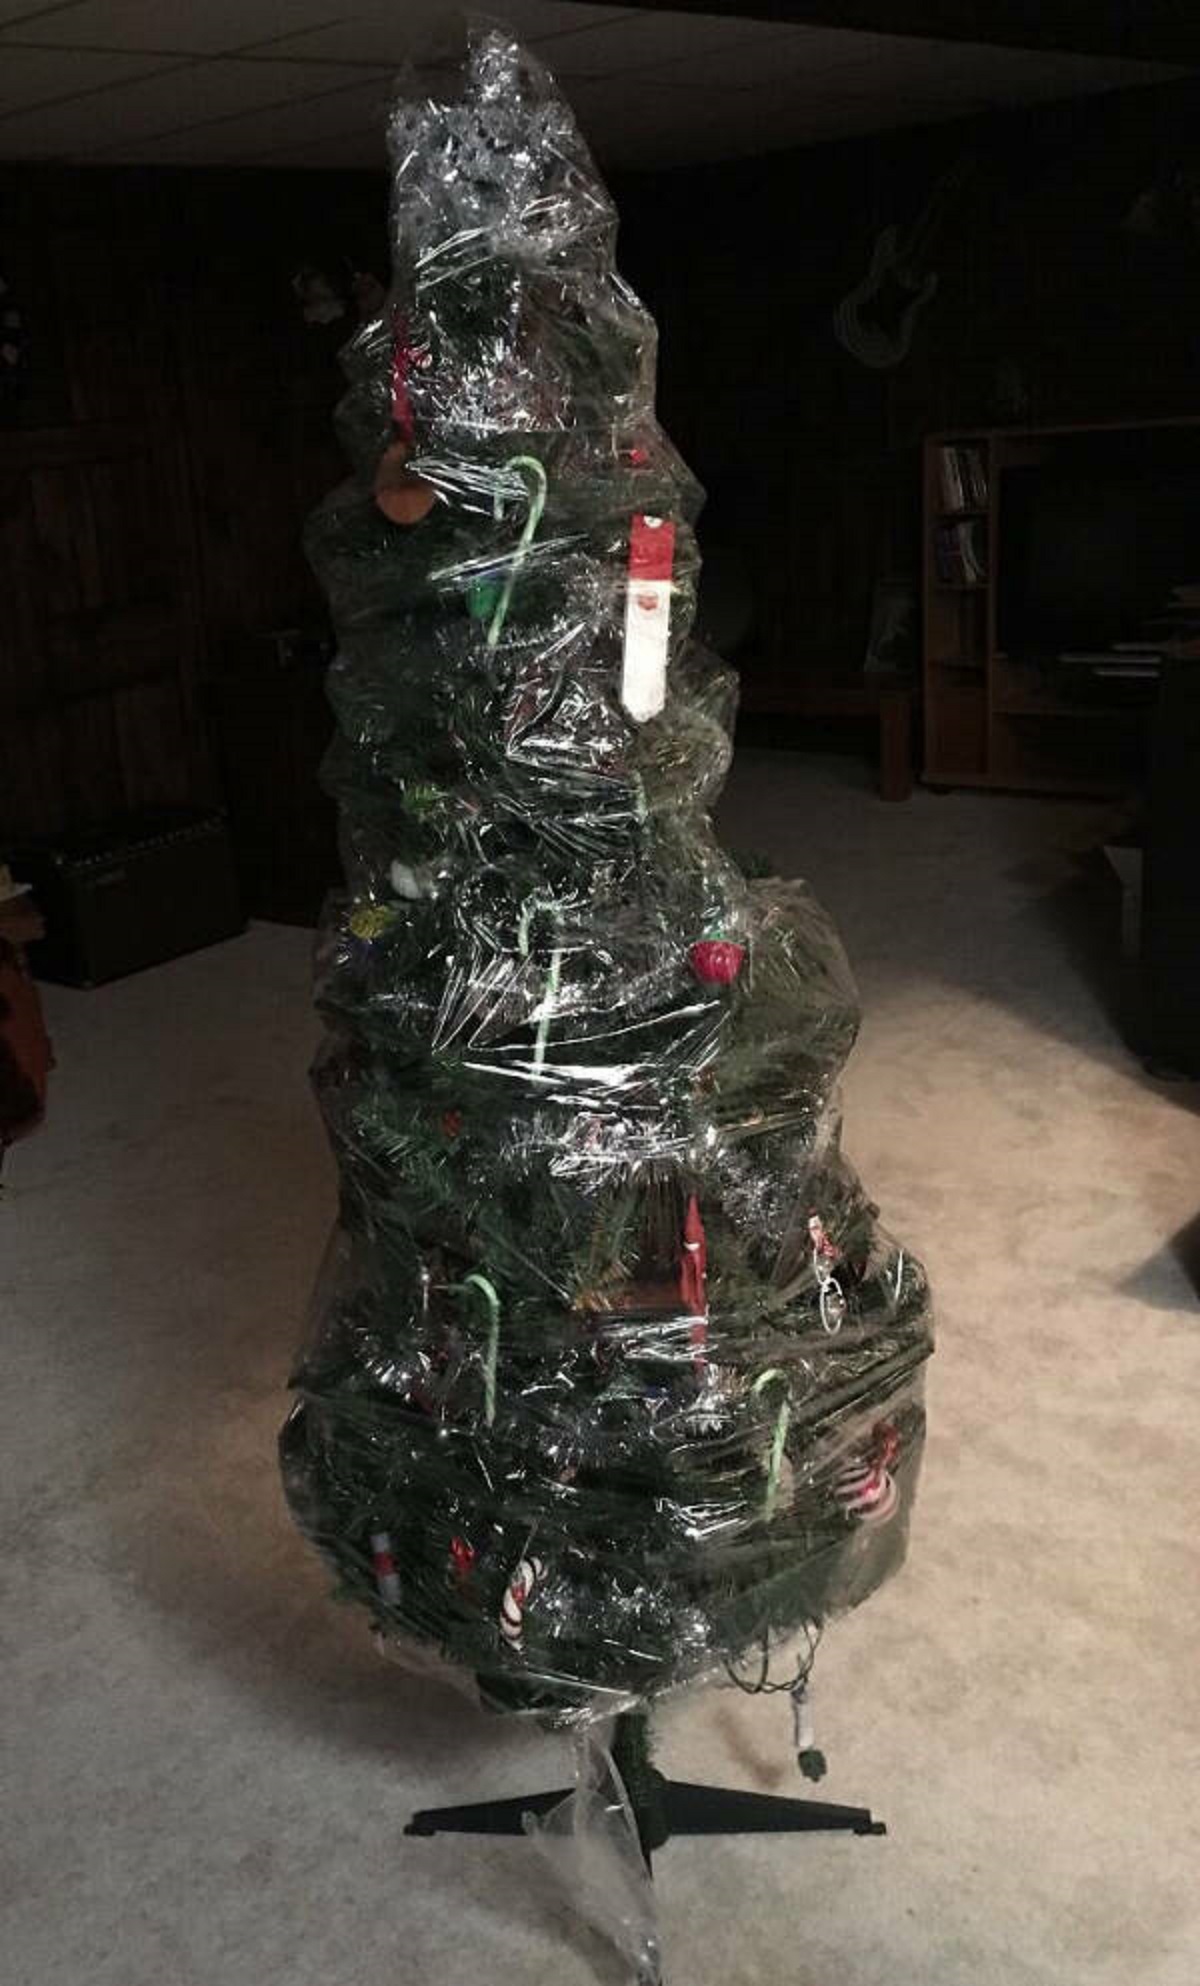 “I trusted my husband to clean-up from christmas last year. This is what I discovered when I went down to our basement to begin decorating this year. Life hack or lazy?”